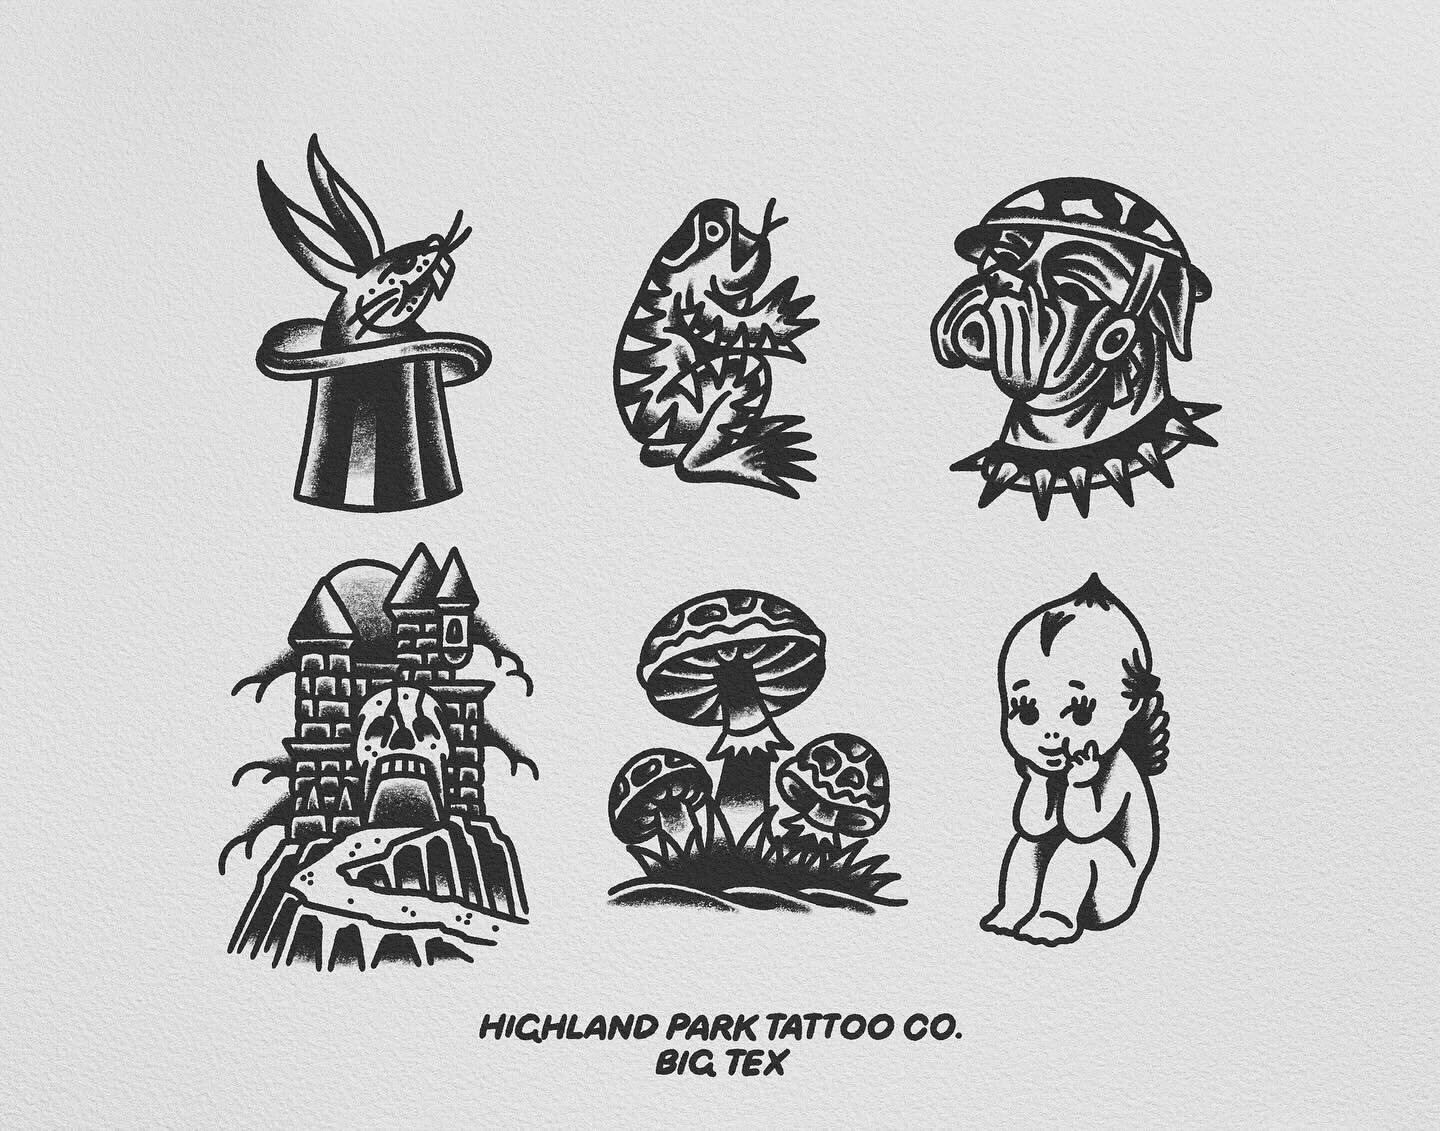 I have flash for days! Just come on down to @highlandparktattooco and take your pick!